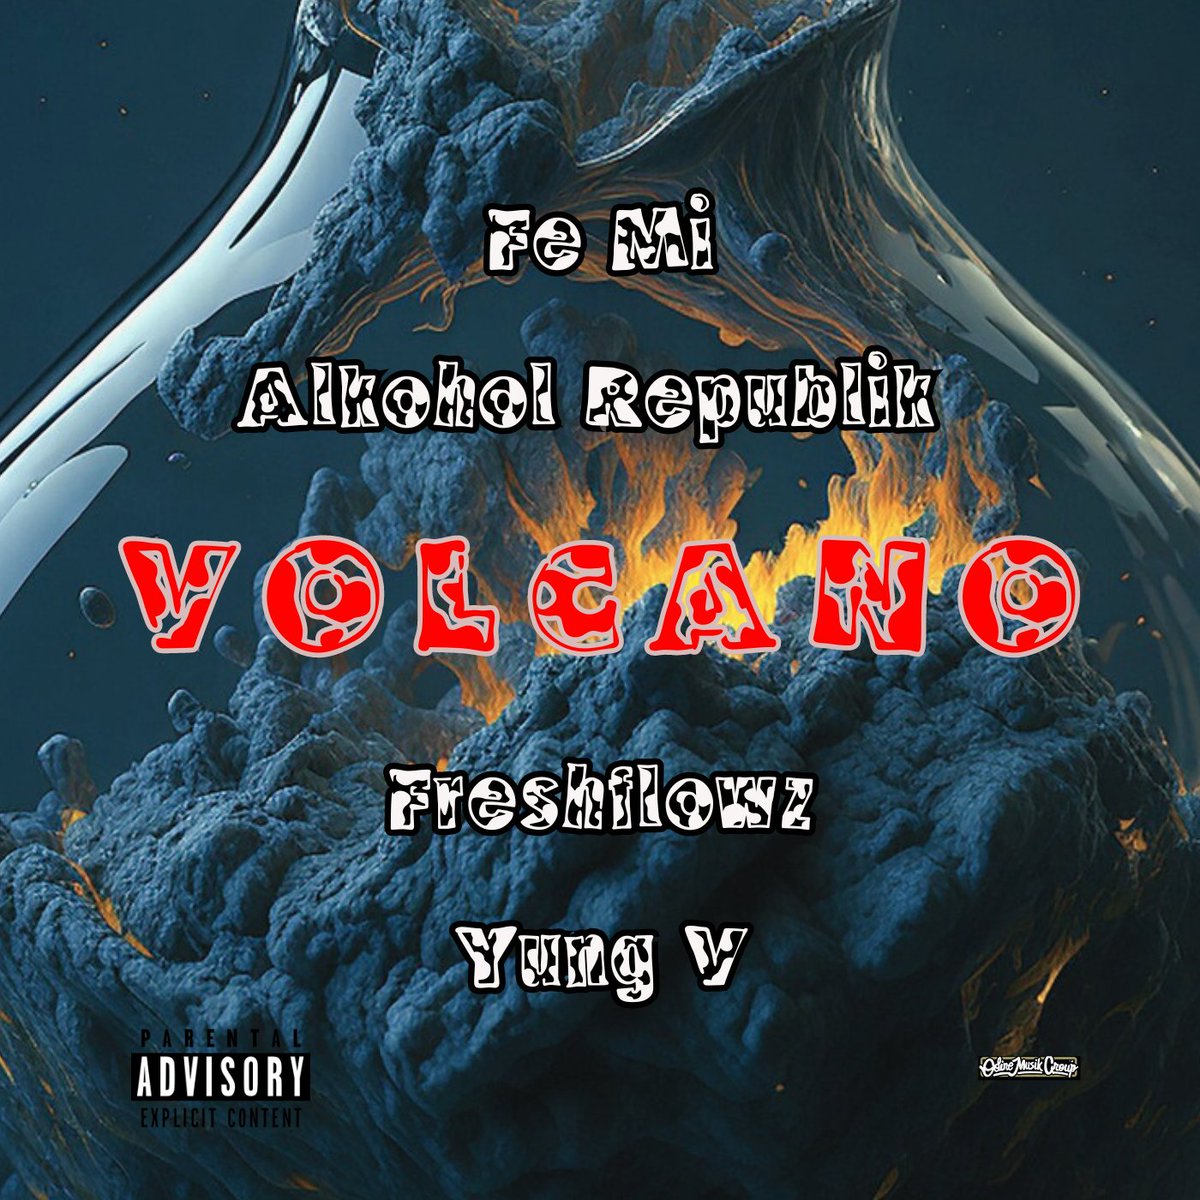 Pre-save my new album 'VOLCANO' on Spotify: distrokid.com/hyperfollow/fe… (powered by @distrokid). This has been a labour of love. Thank you to @RepublikAlkohol @FreshFlowz Virgil for helping me produce one of my favourite tracks.